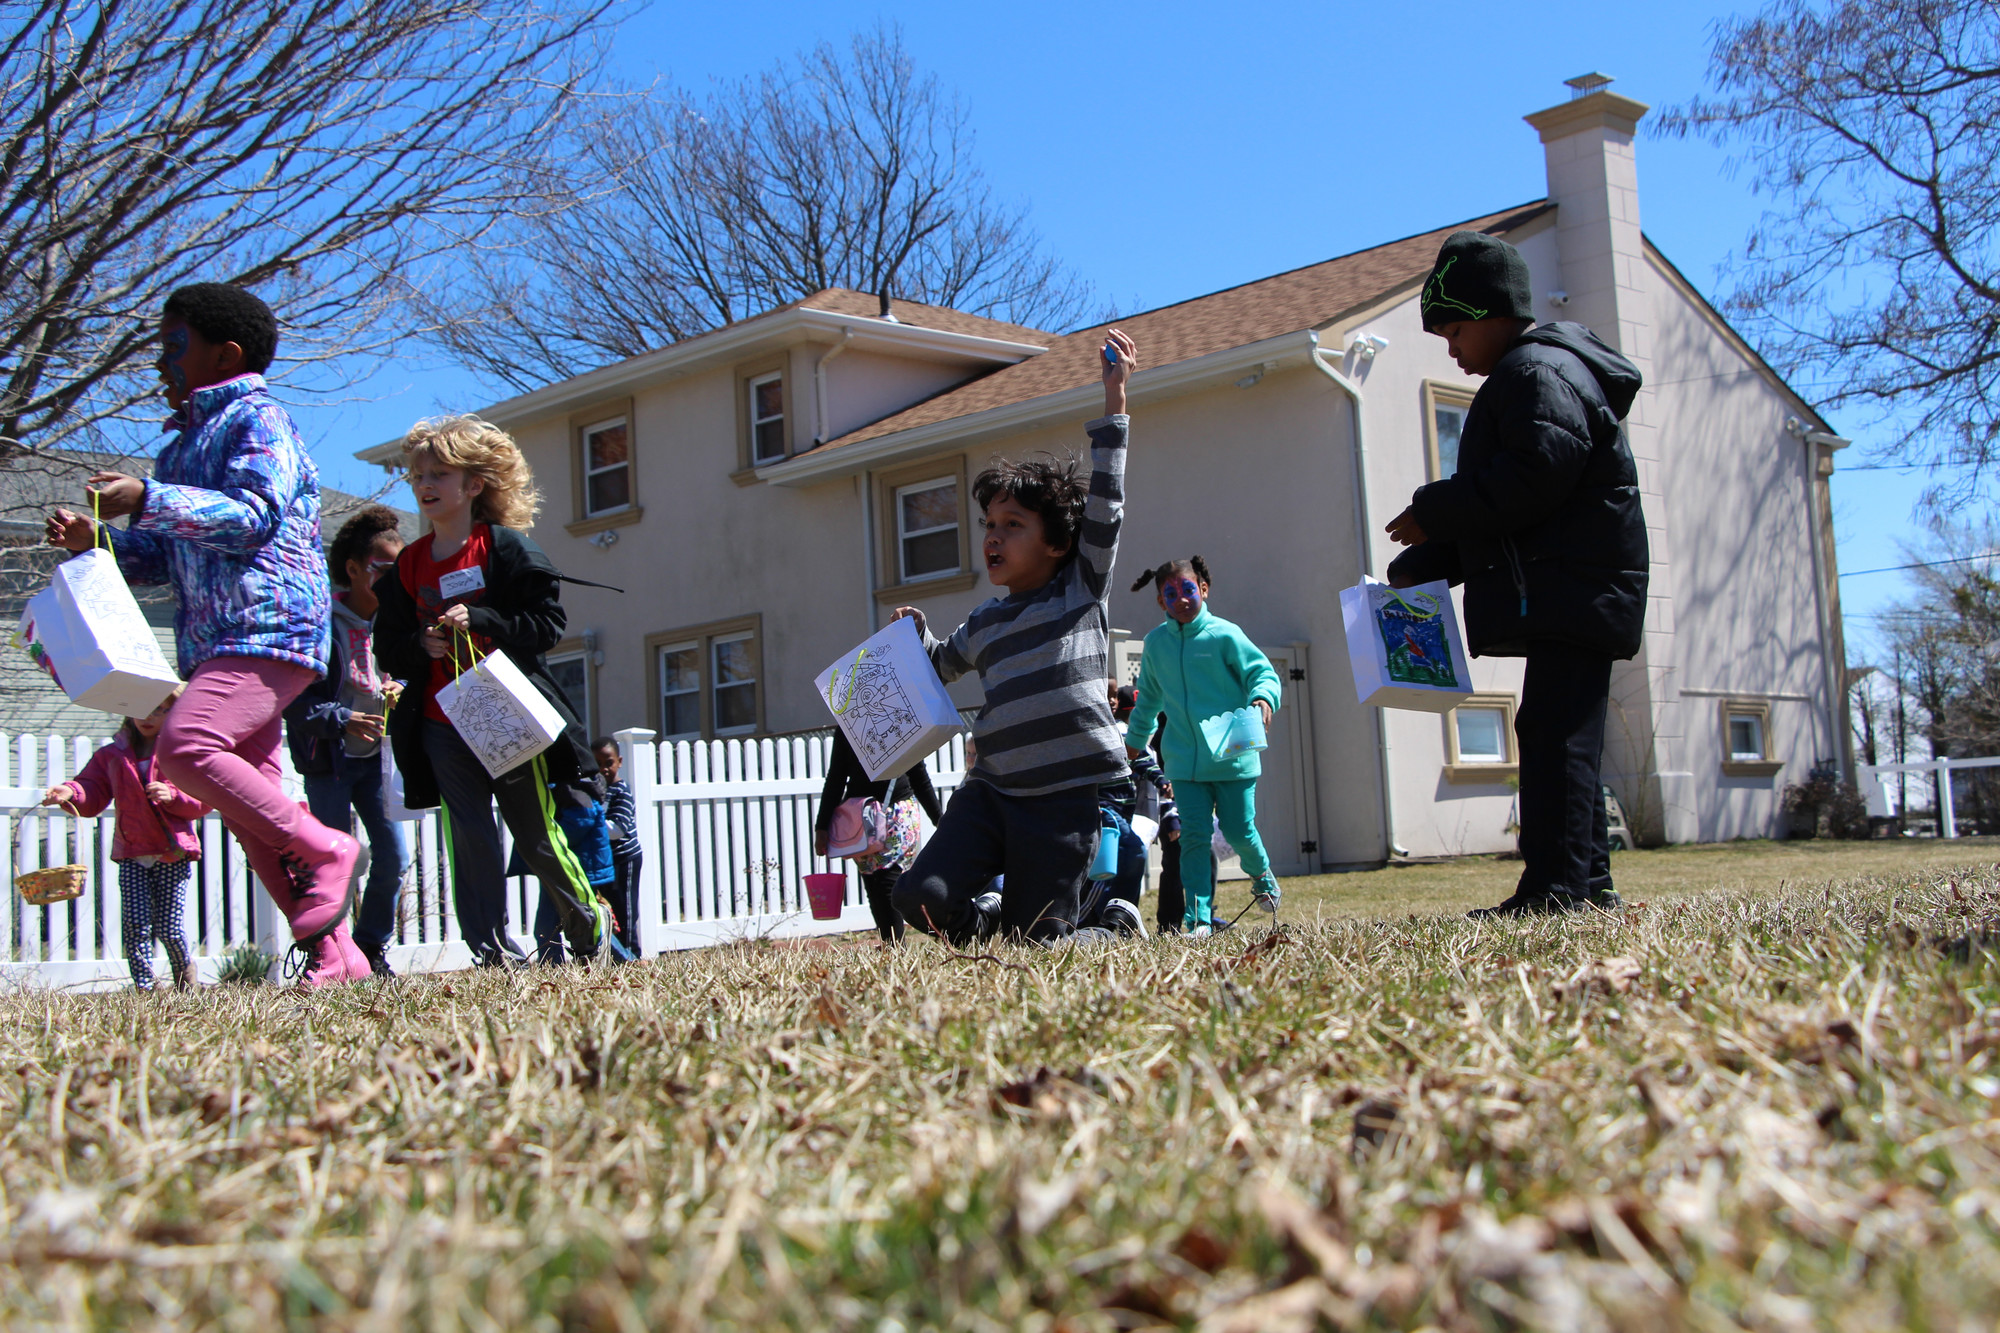 Many children found eggs with some sweet treats inside during South Nassau Christian Church’s Easter Egg Hunt on April 4.